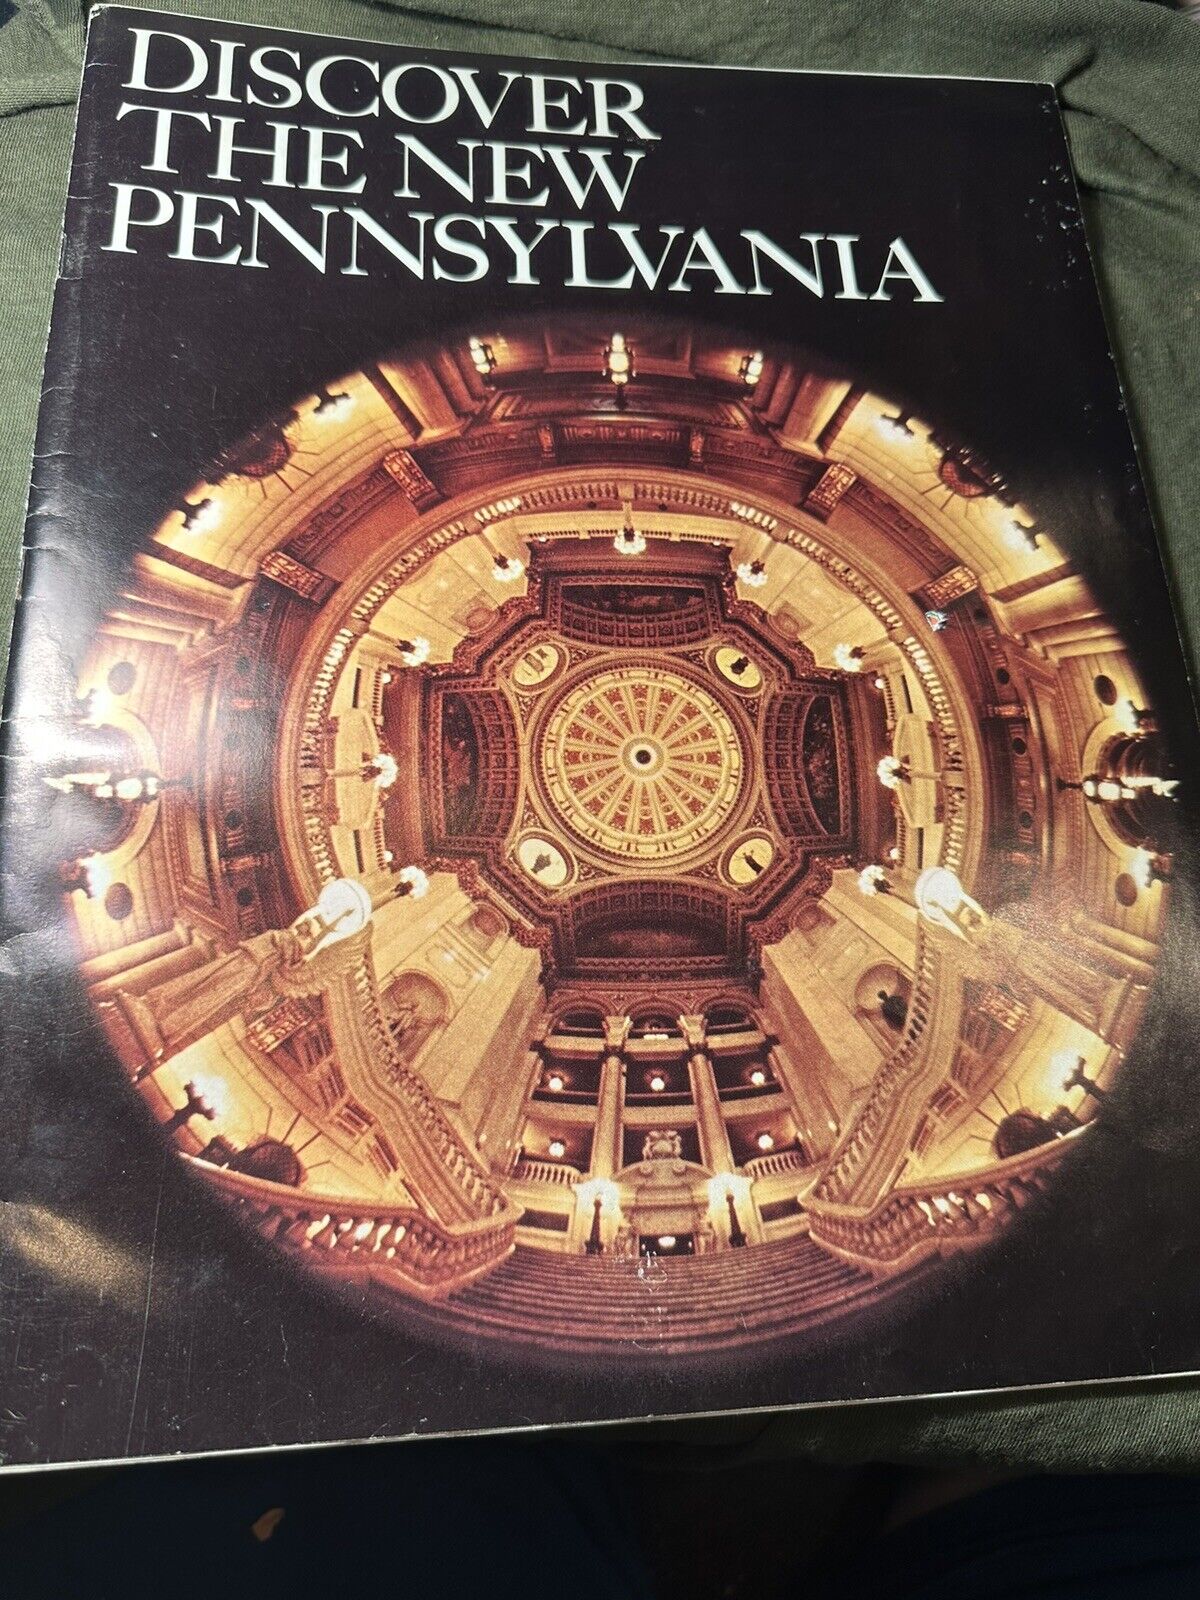 Discover the New Pennsylvania - 1967 educational magazine.  Large 13.5 by 10.5